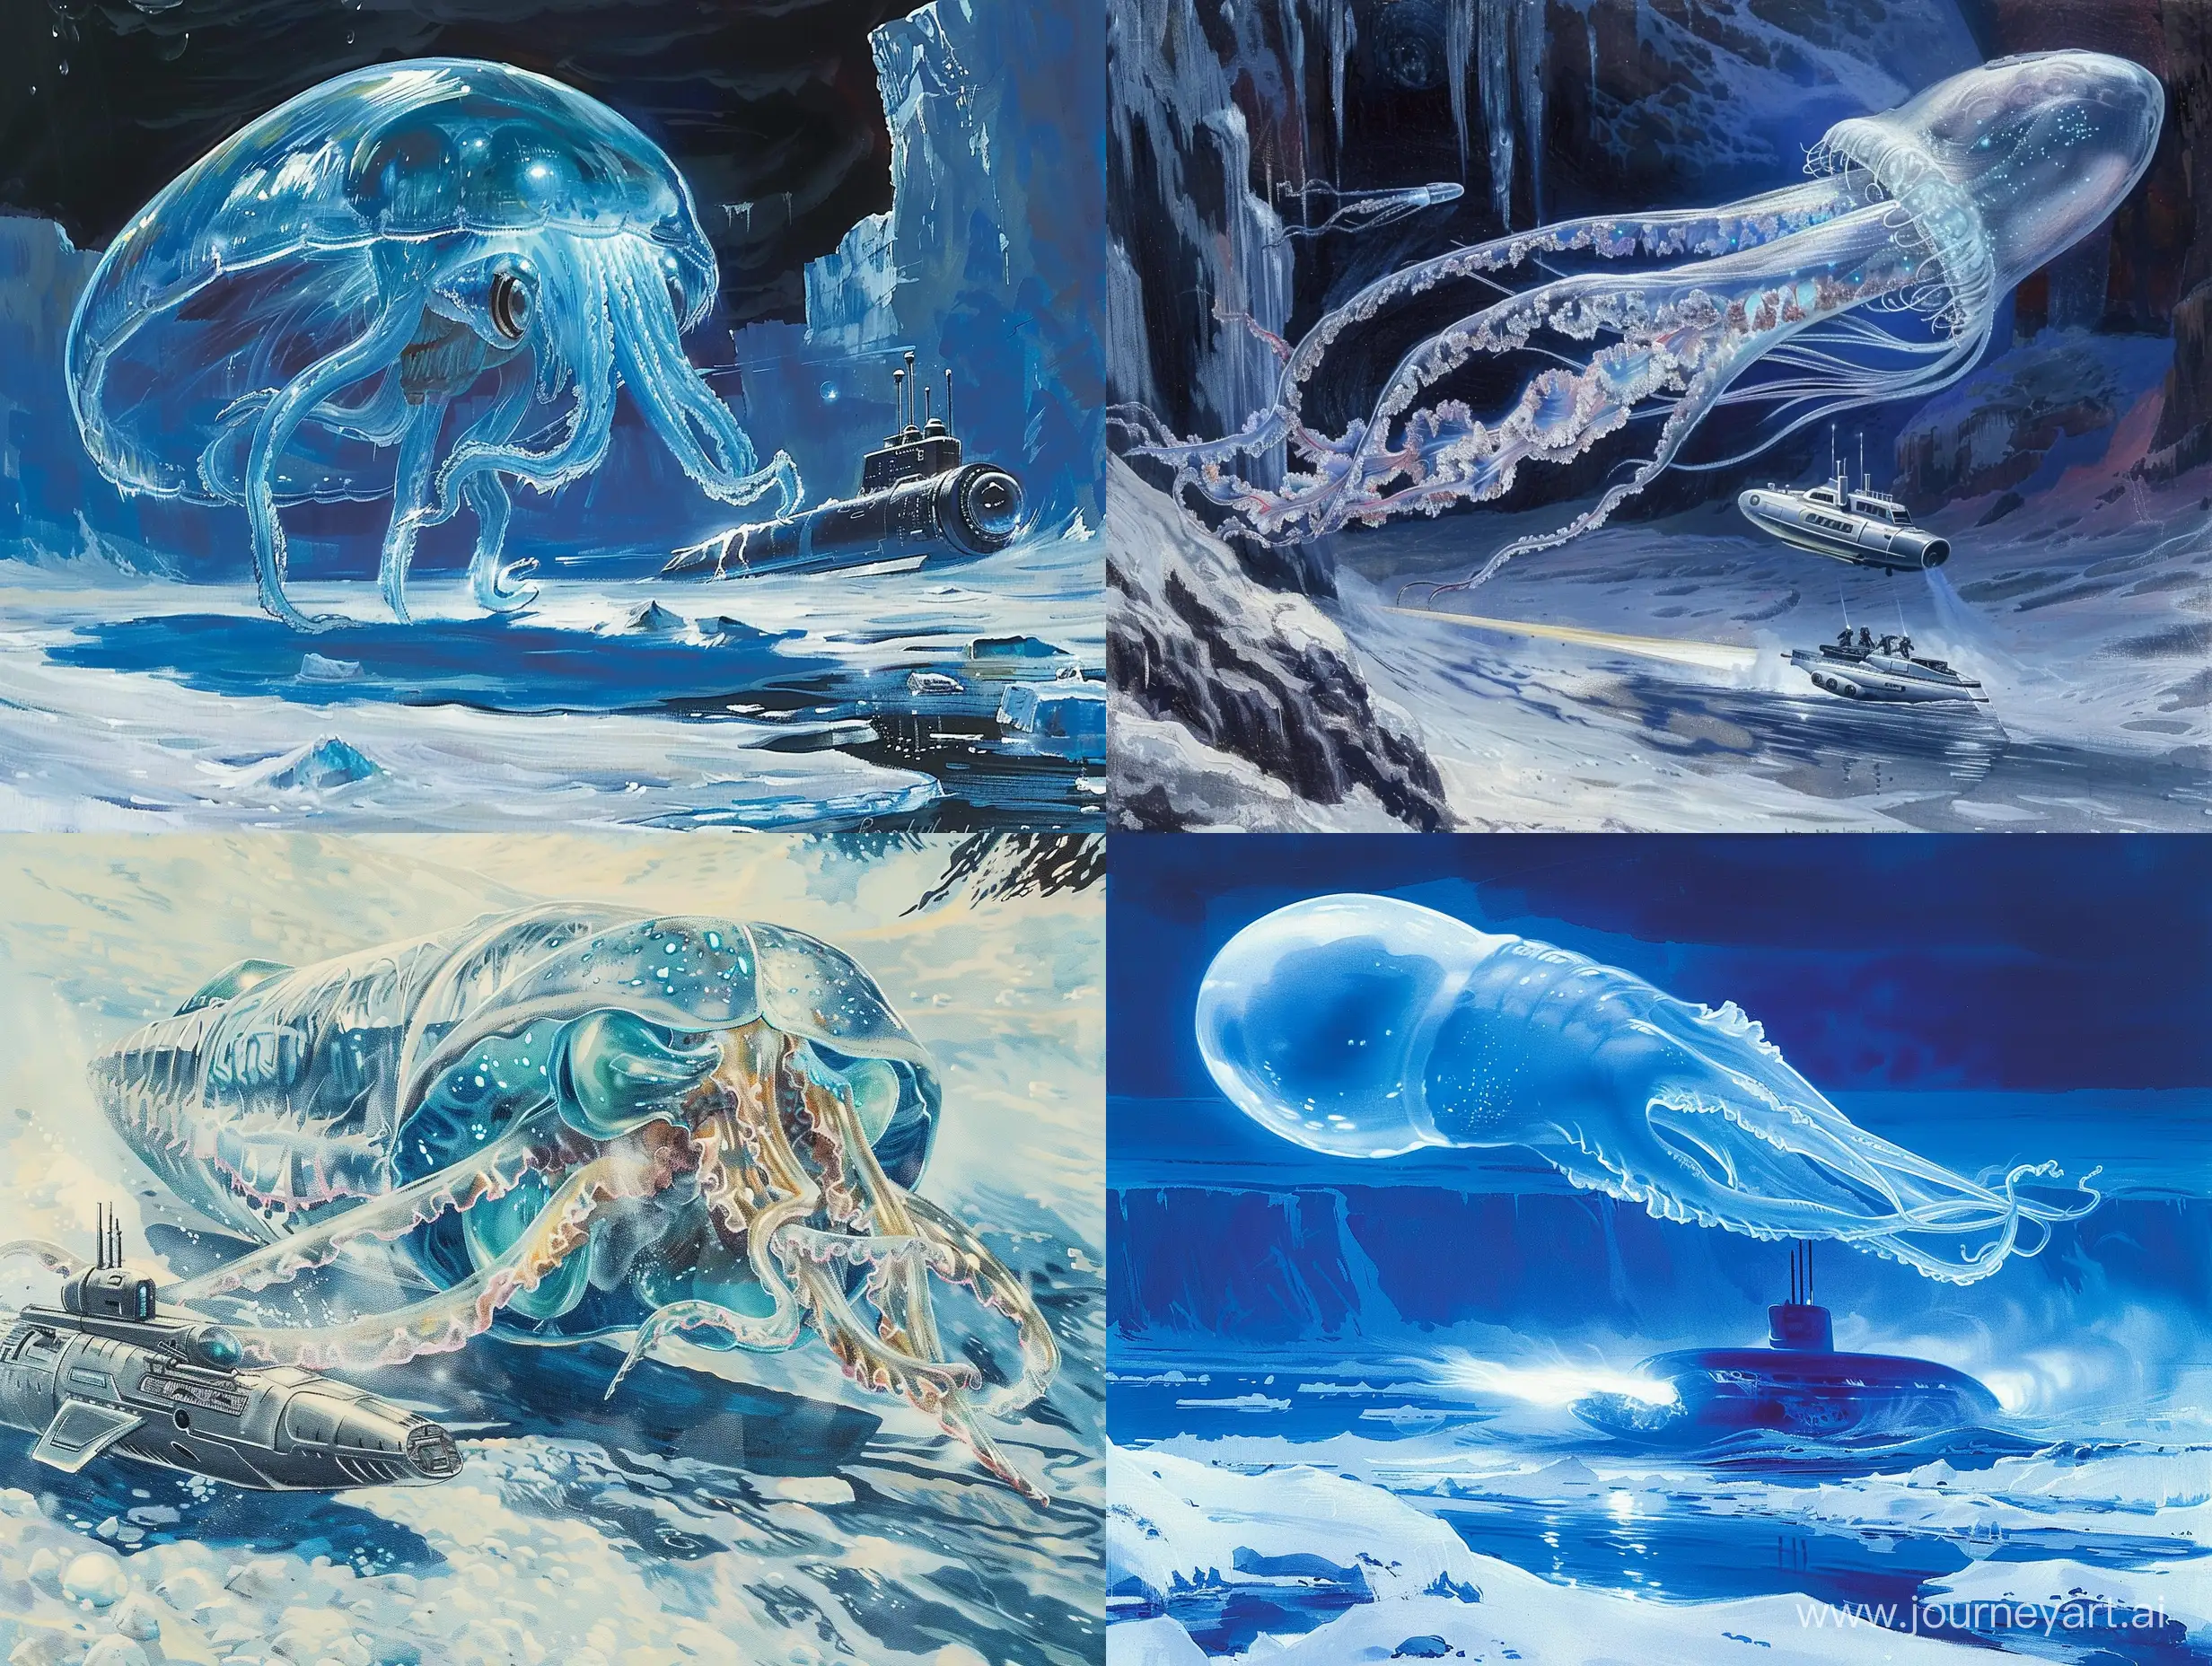 a bioluminescent otherworldly alien creature that is like a cross between a jellyfish and cuttlefish being encountered by a futuristic submarine in the icy oceans of Europa. painted in the style of Ralph McQuarrie. cold colors. retro science fiction style.

